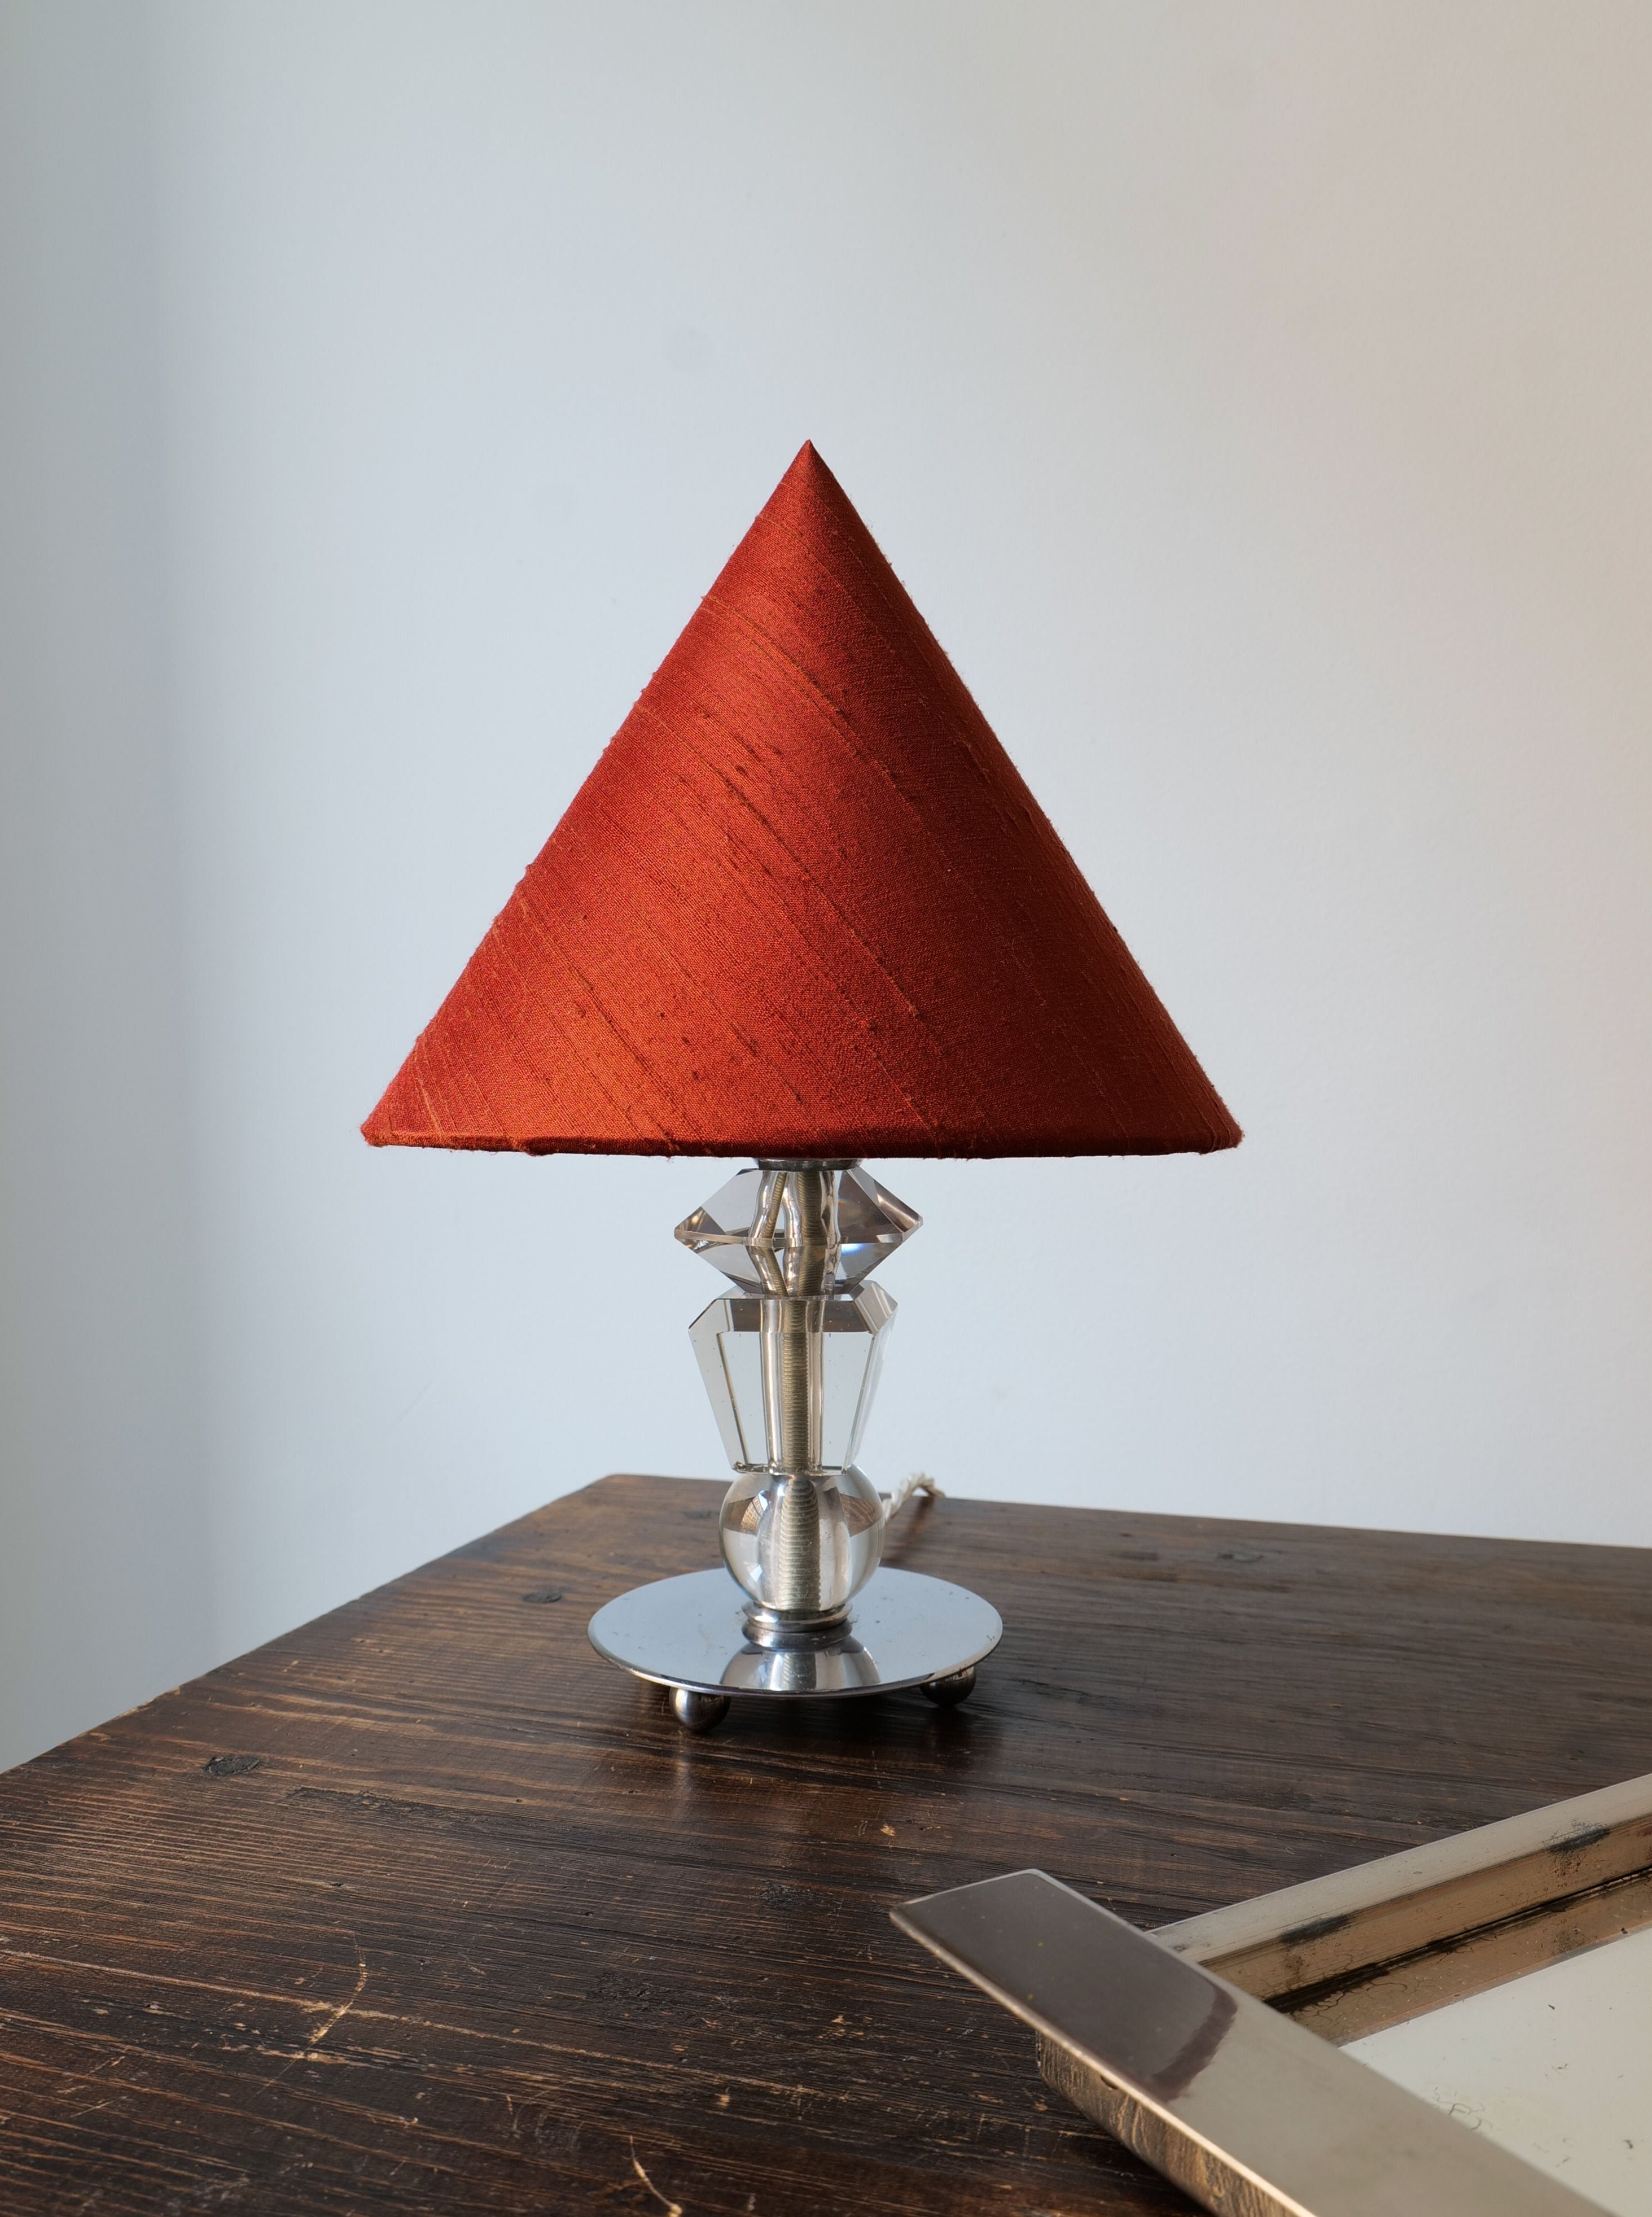 An Art Deco lamp with a red triangular lampshade on a chrome base, sitting on a wooden table against a white wall. The table also has a corner of a book visible.
An Collection apart Deco Crystal Table Lamp with collection apart's red triangular lampshade on a chrome base, sitting on a wooden table against a white wall. The table also has a corner of a book visible.